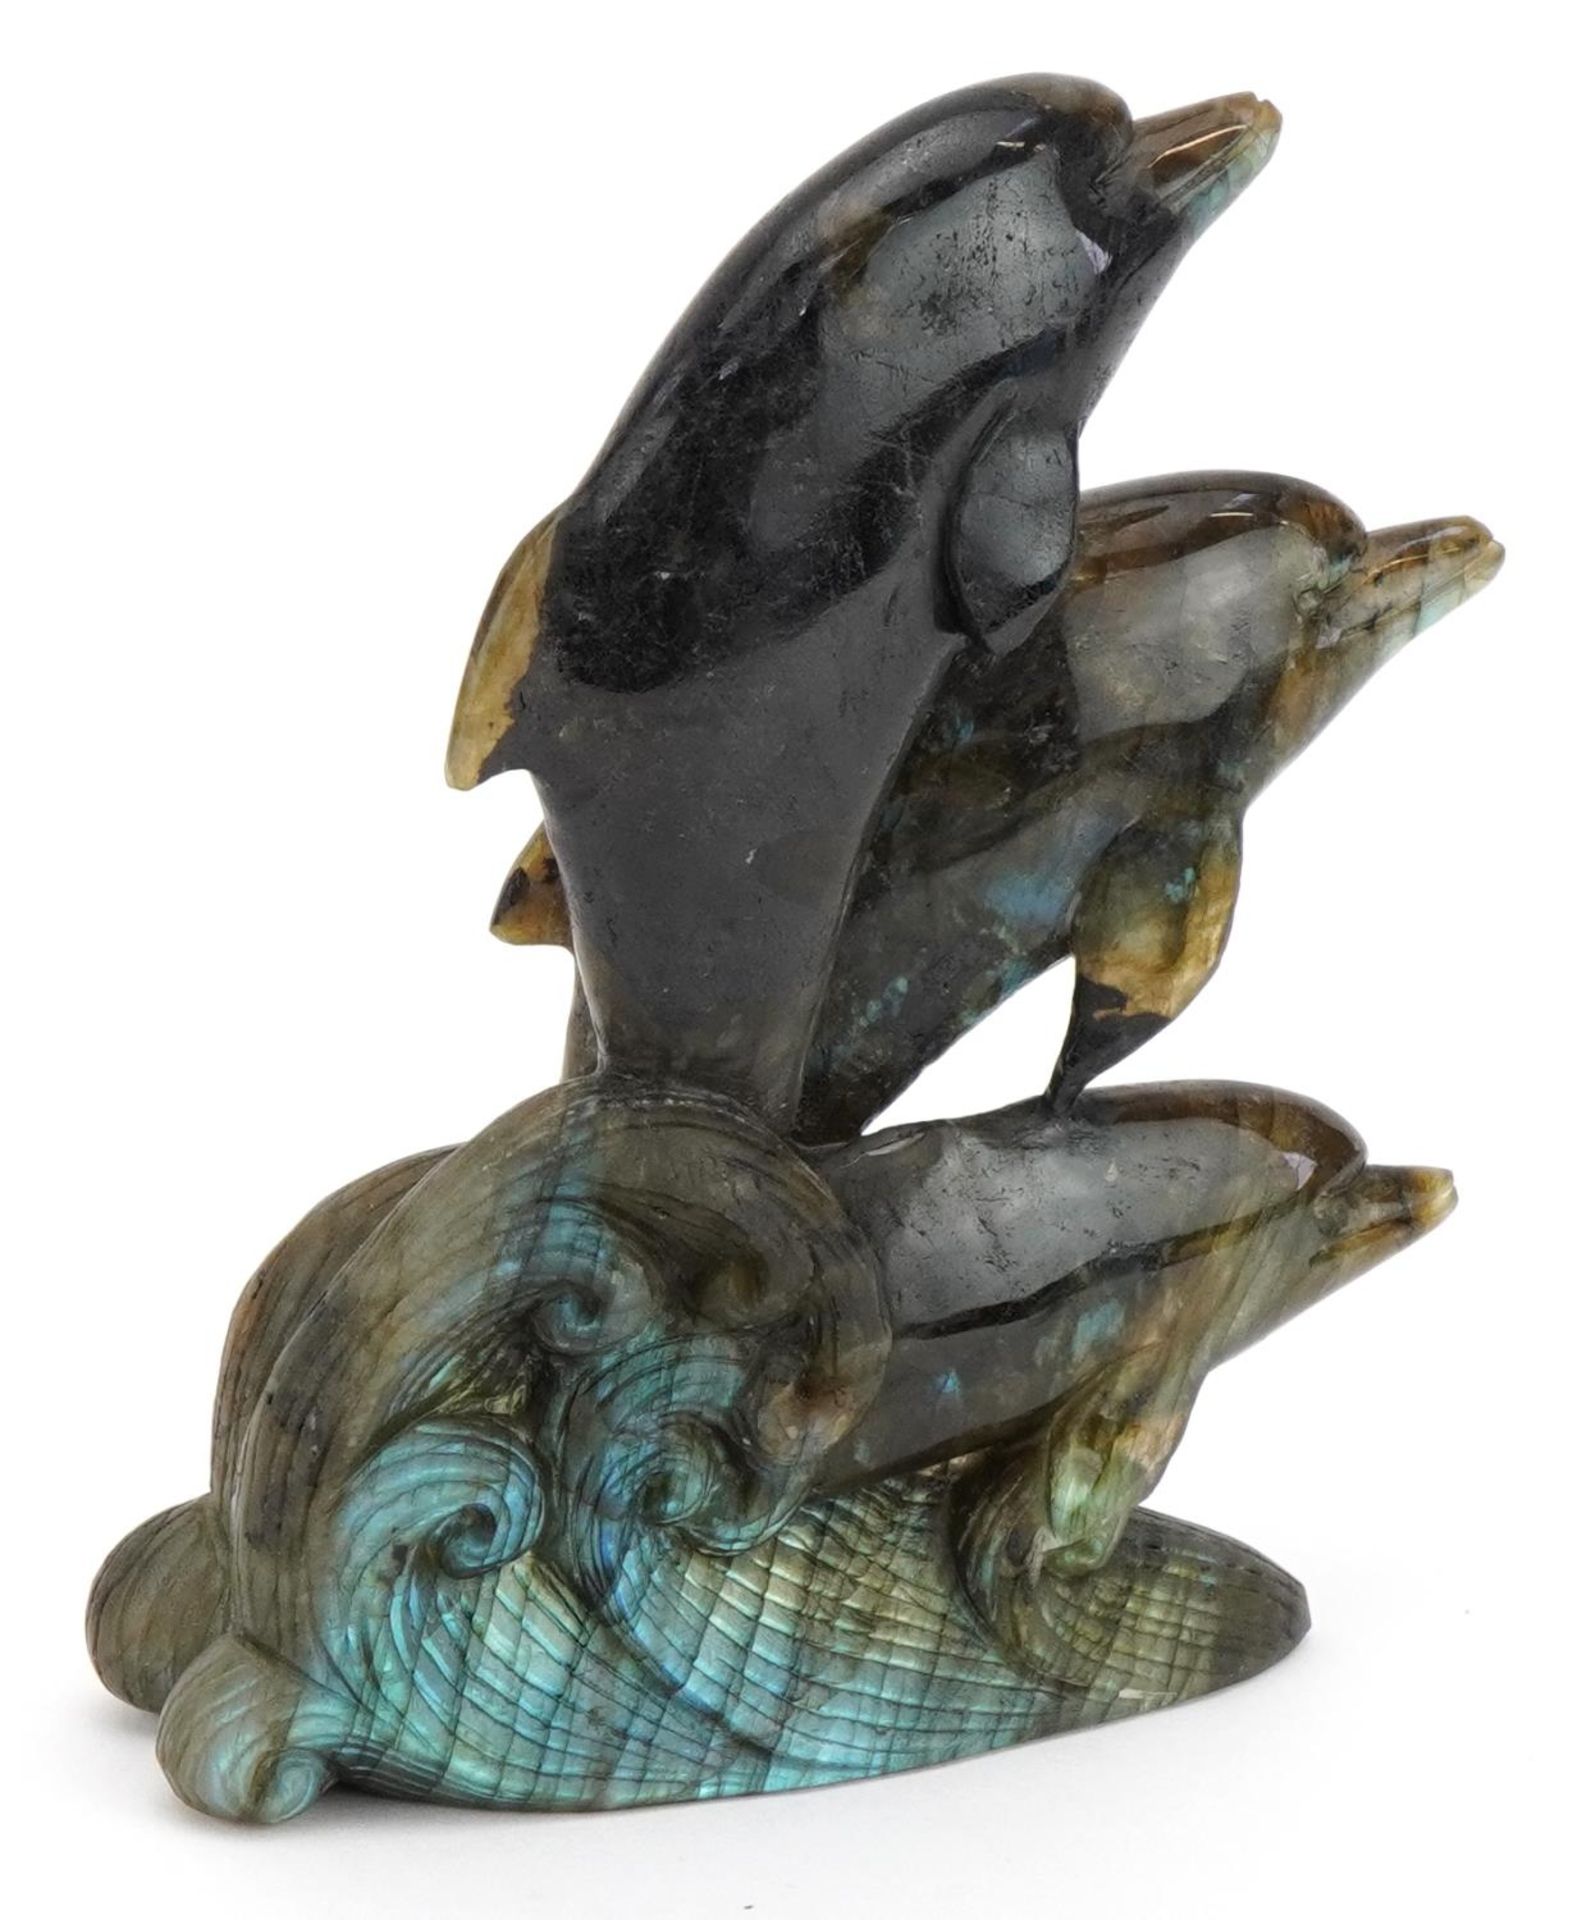 Labradorite carving of three dolphins, 15cm high - Image 3 of 6